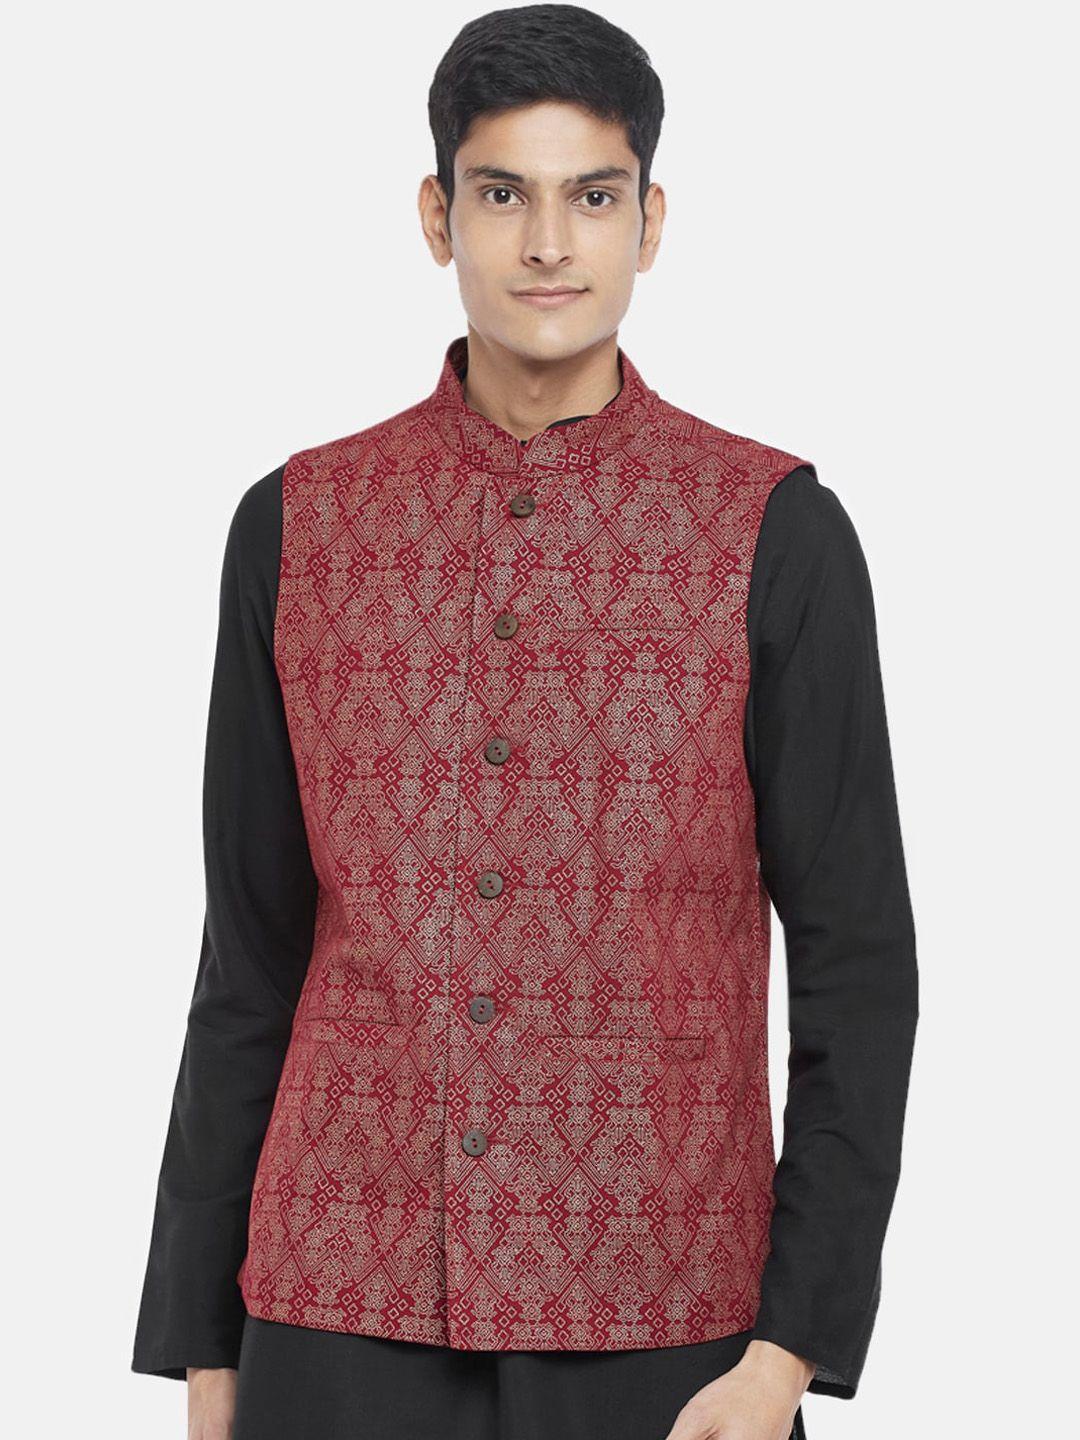 indus-route-by-pantaloons-men-maroon-&-golden-printed-pure-cotton-woven-waistcoat